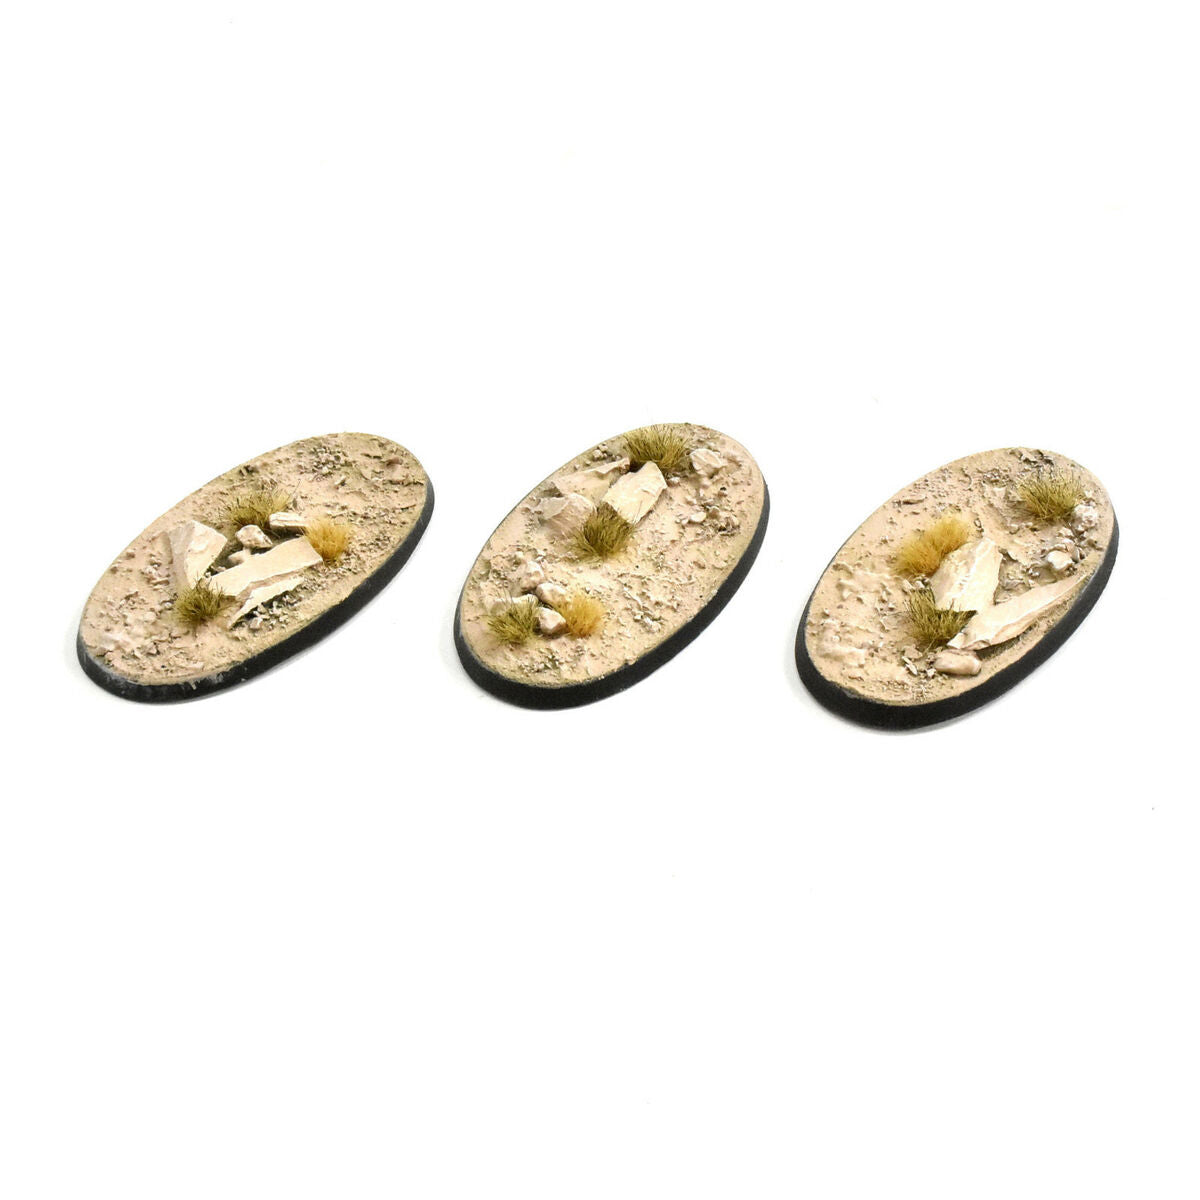 Gamers Grass Battle Ready Bases Arid Steppe Oval 60mm (x4) - Loaded Dice